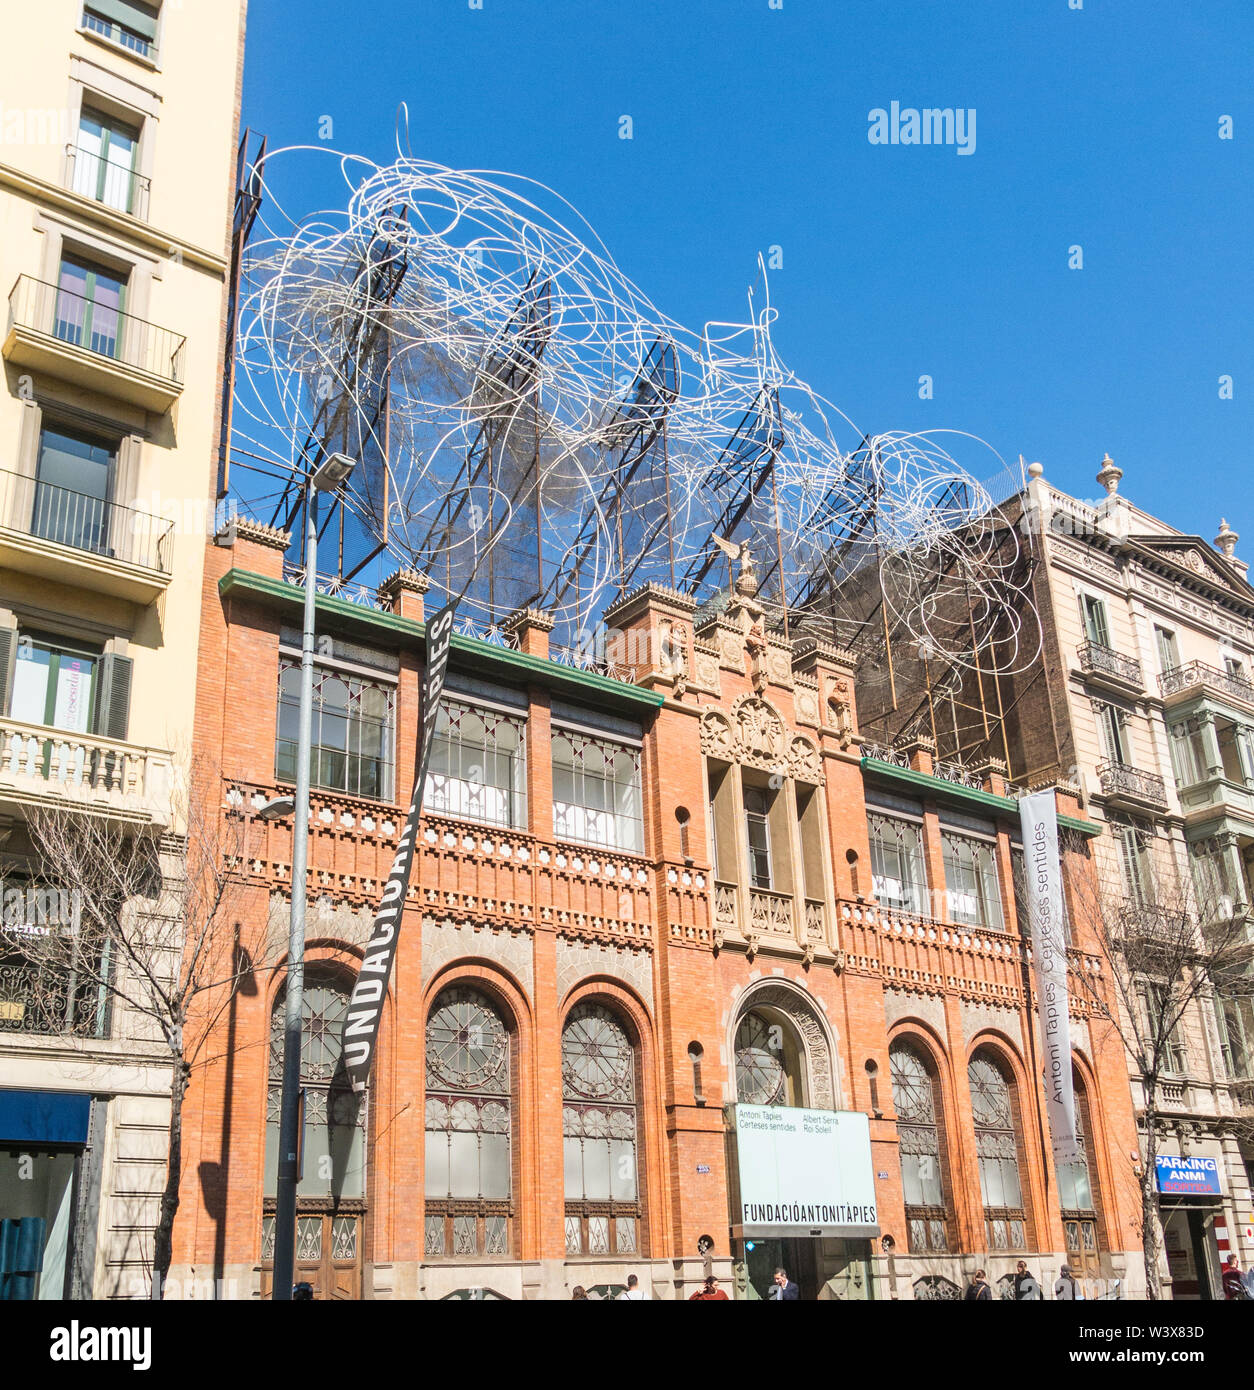 BARCELONA, SPAIN - March 21 2019- View of the Fundacio Antoni Tapies foundation, a cultural center and museum located in Arago Street, in Barcelona, C Stock Photo